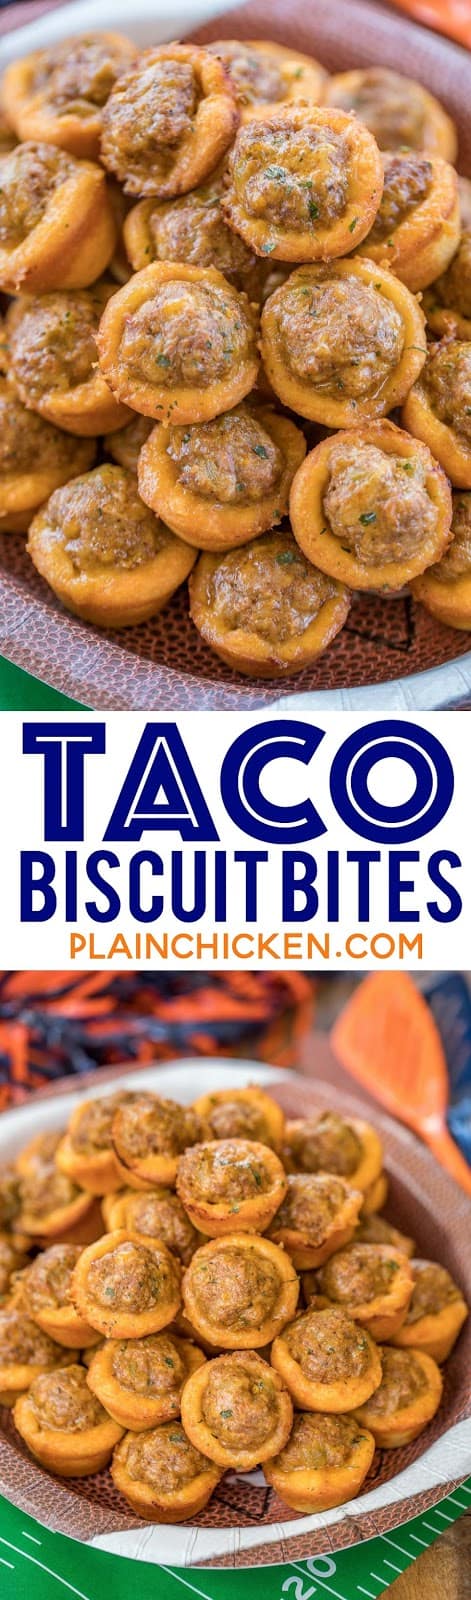 Taco Biscuit Bites Recipe - taco seasoned sausage, green chiles and cheese baked in mini biscuit cups! SERIOUSLY delicious! Great for parties and tailgates!!! Can make ahead for easy entertaining. Only 5 ingredients and ready to eat in 15 minutes! Dip in salsa and/or ranch. These things FLY off the plate!